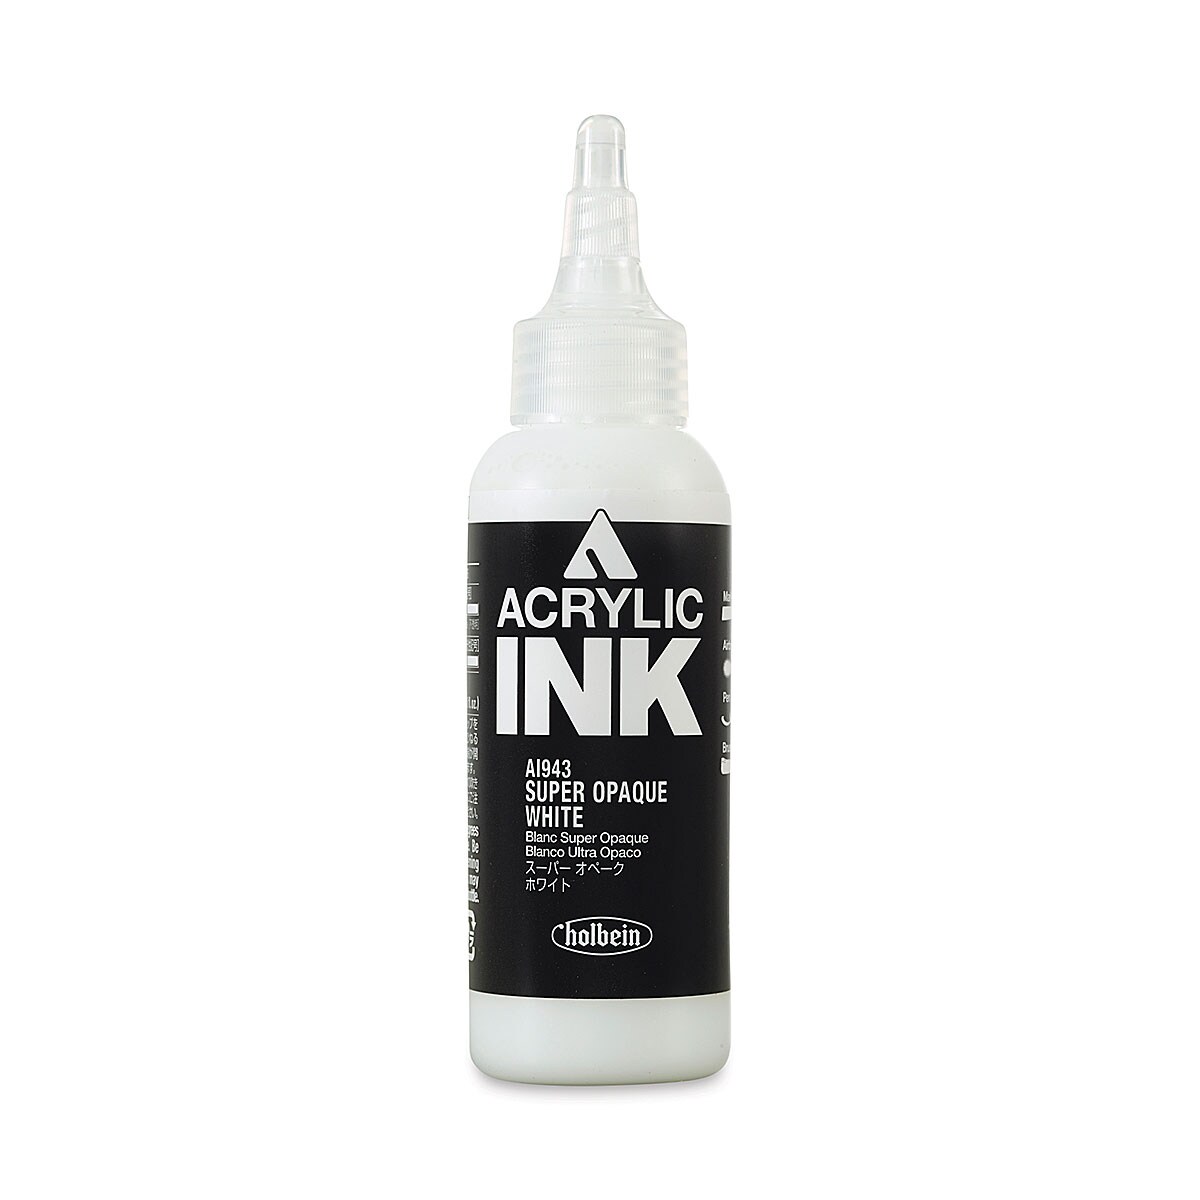 Holbein Acrylic Ink - Super Opaque White, 100 ml | Michaels